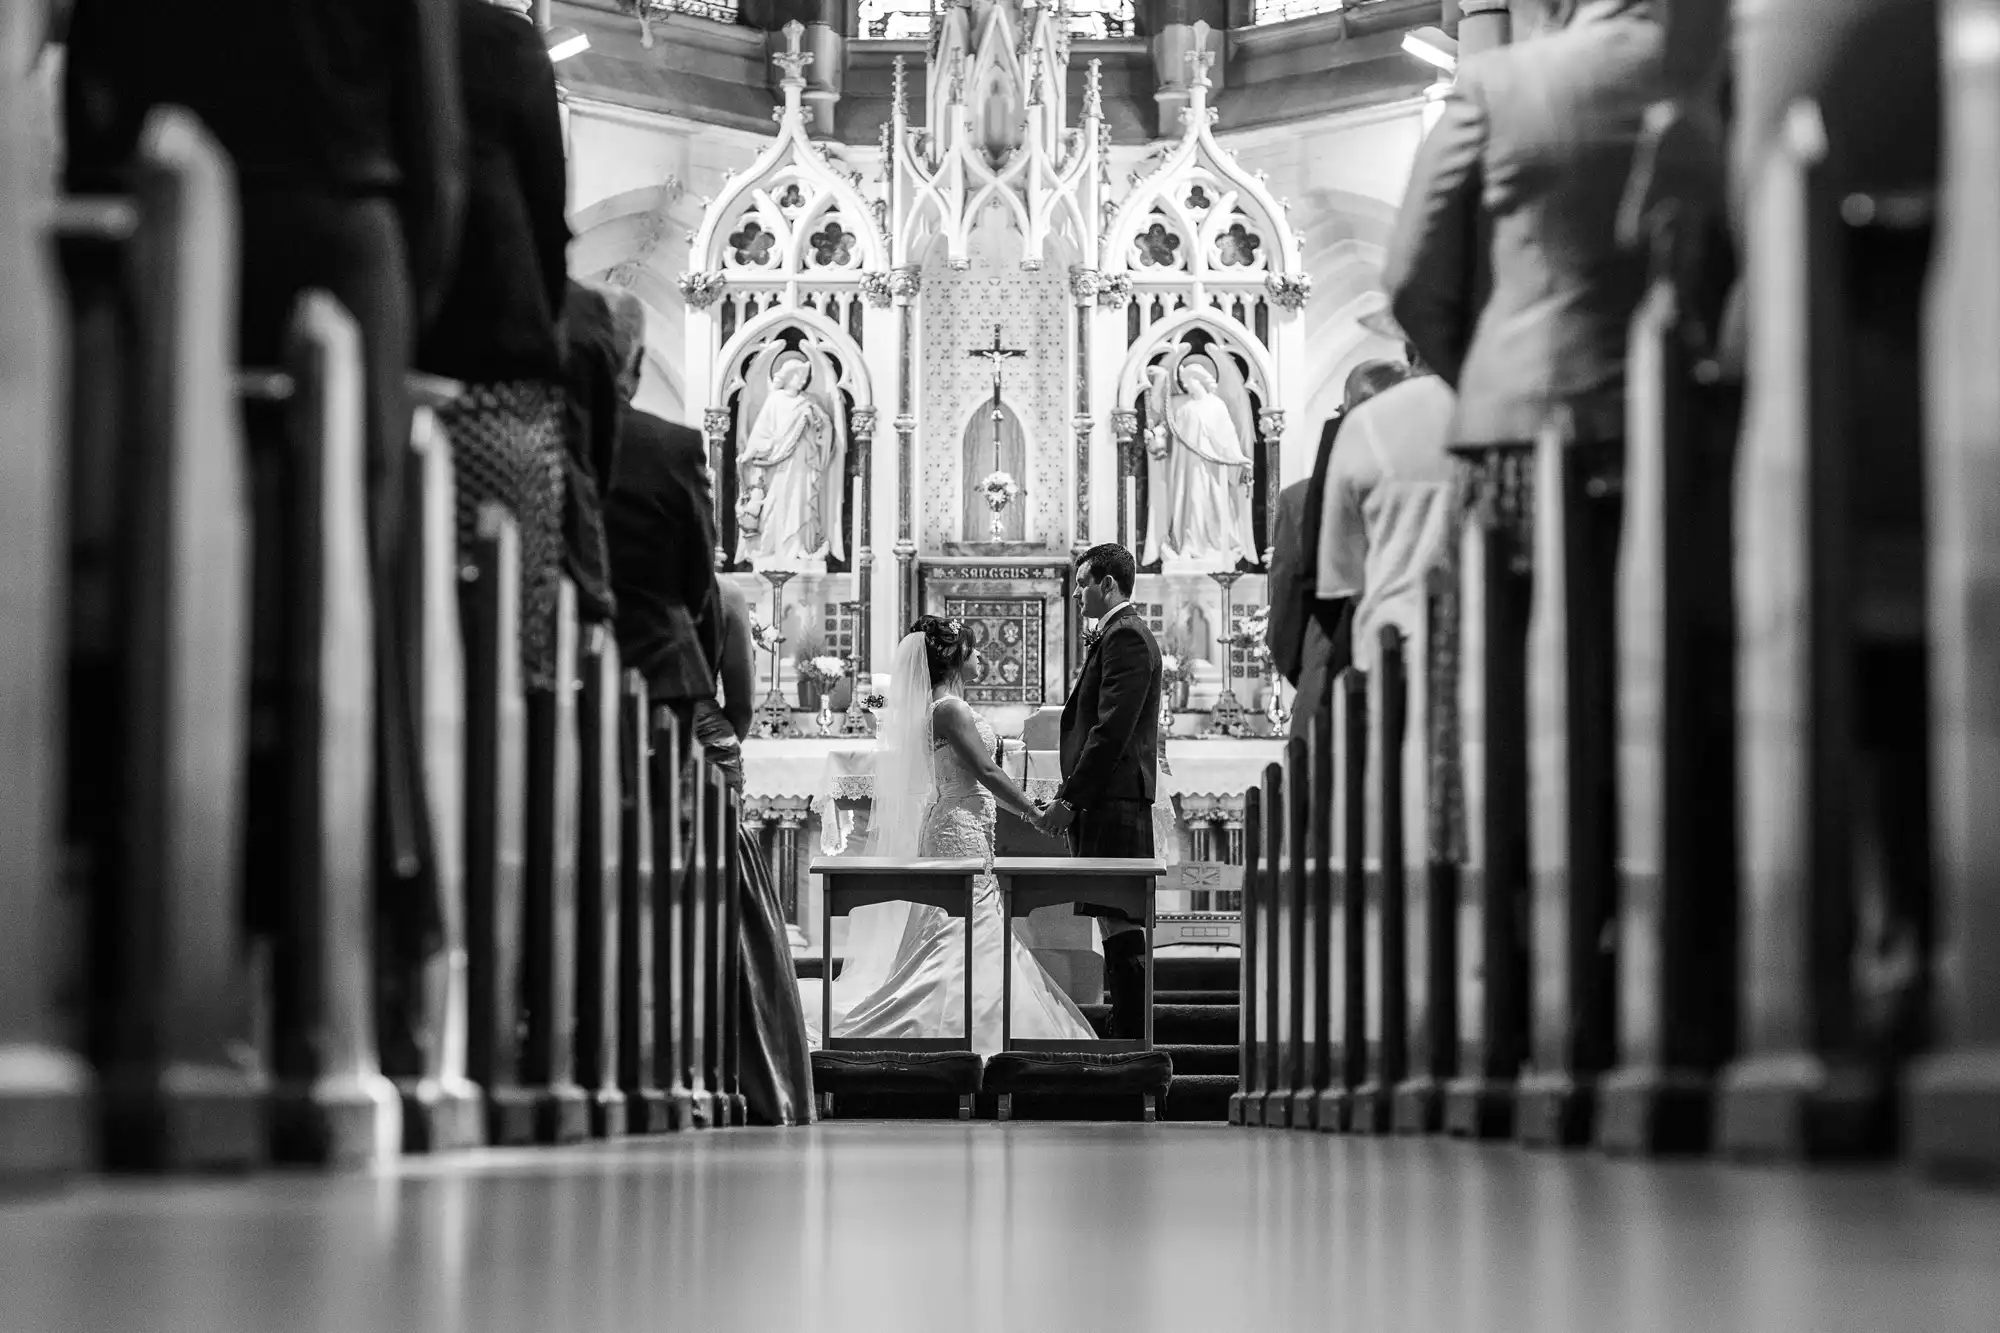 A bride and groom sit facing each other at an altar in a church, viewed between rows of guests' legs from the aisle.